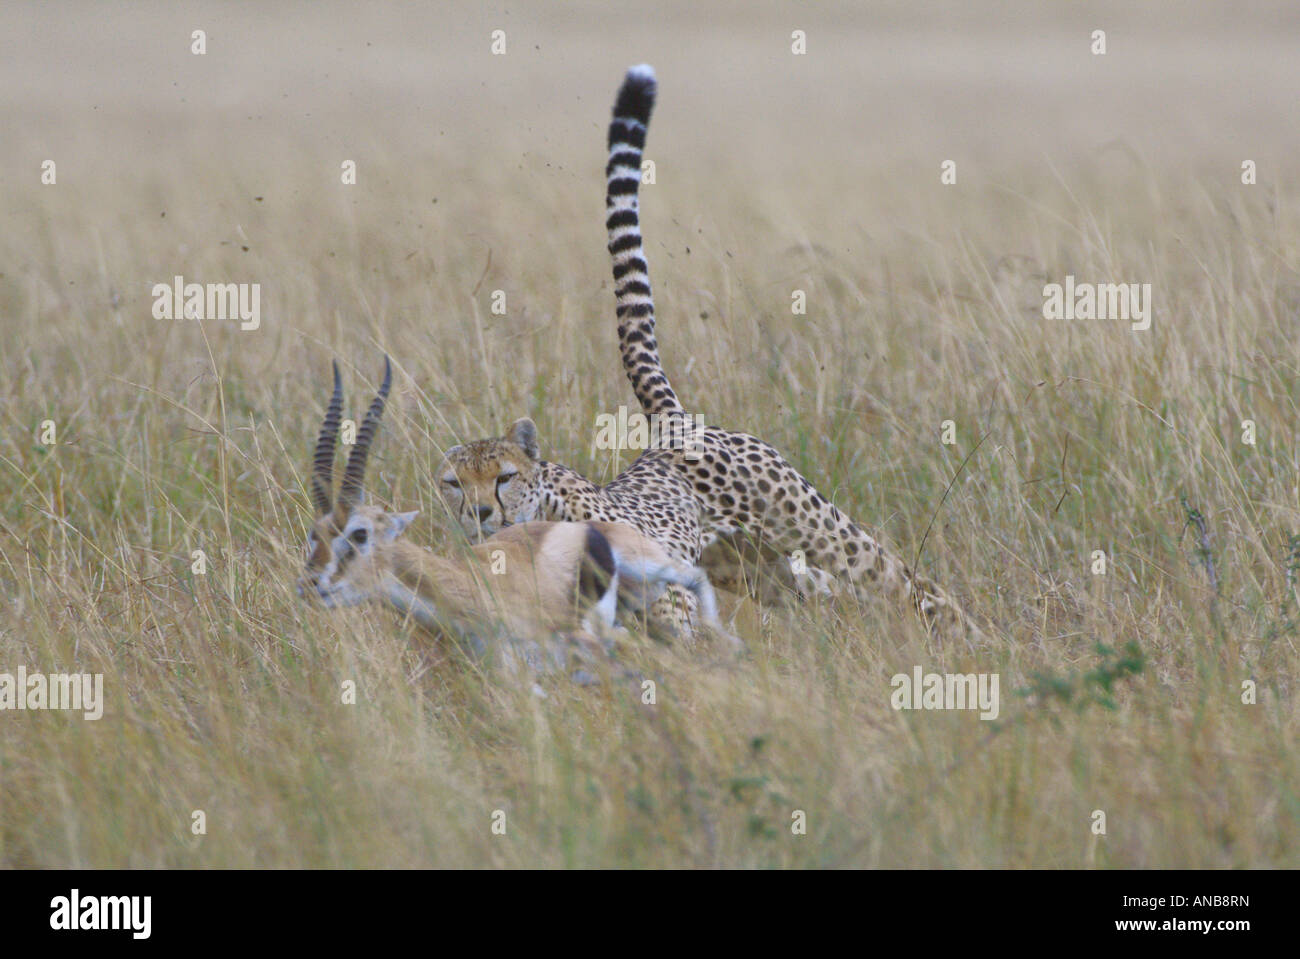 Cheetah (Acinonyx jubatus) with outstretched tail for balance chasing after a Grants gazelle Stock Photo